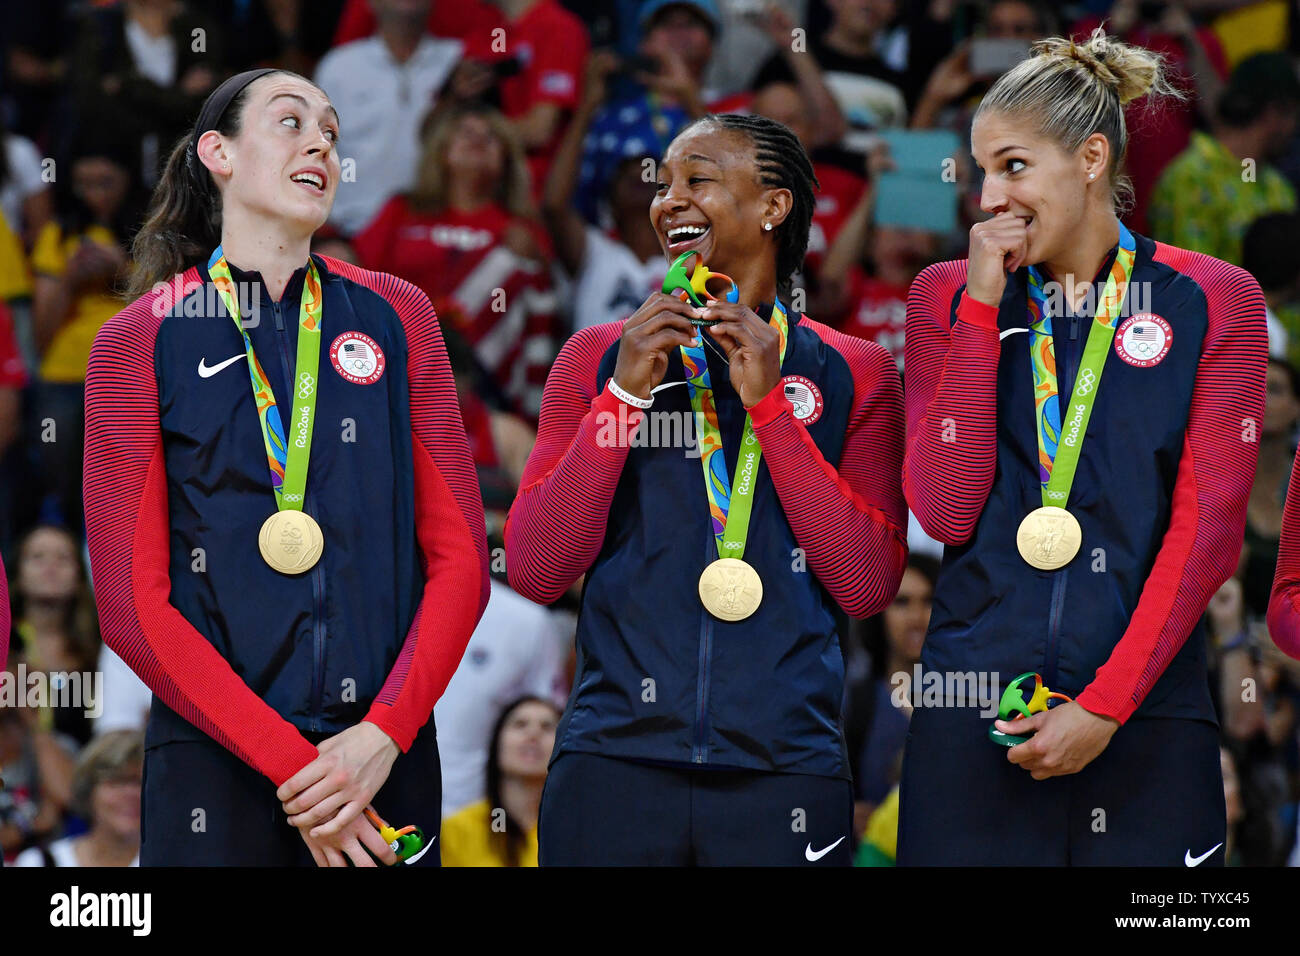 Members Of The United States Women S Basketball Team Show Their Gold Medals After Winning The Women S Basketball Gold Medal Game In The Carioca Arena 1 At The 16 Rio Summer Olympics In